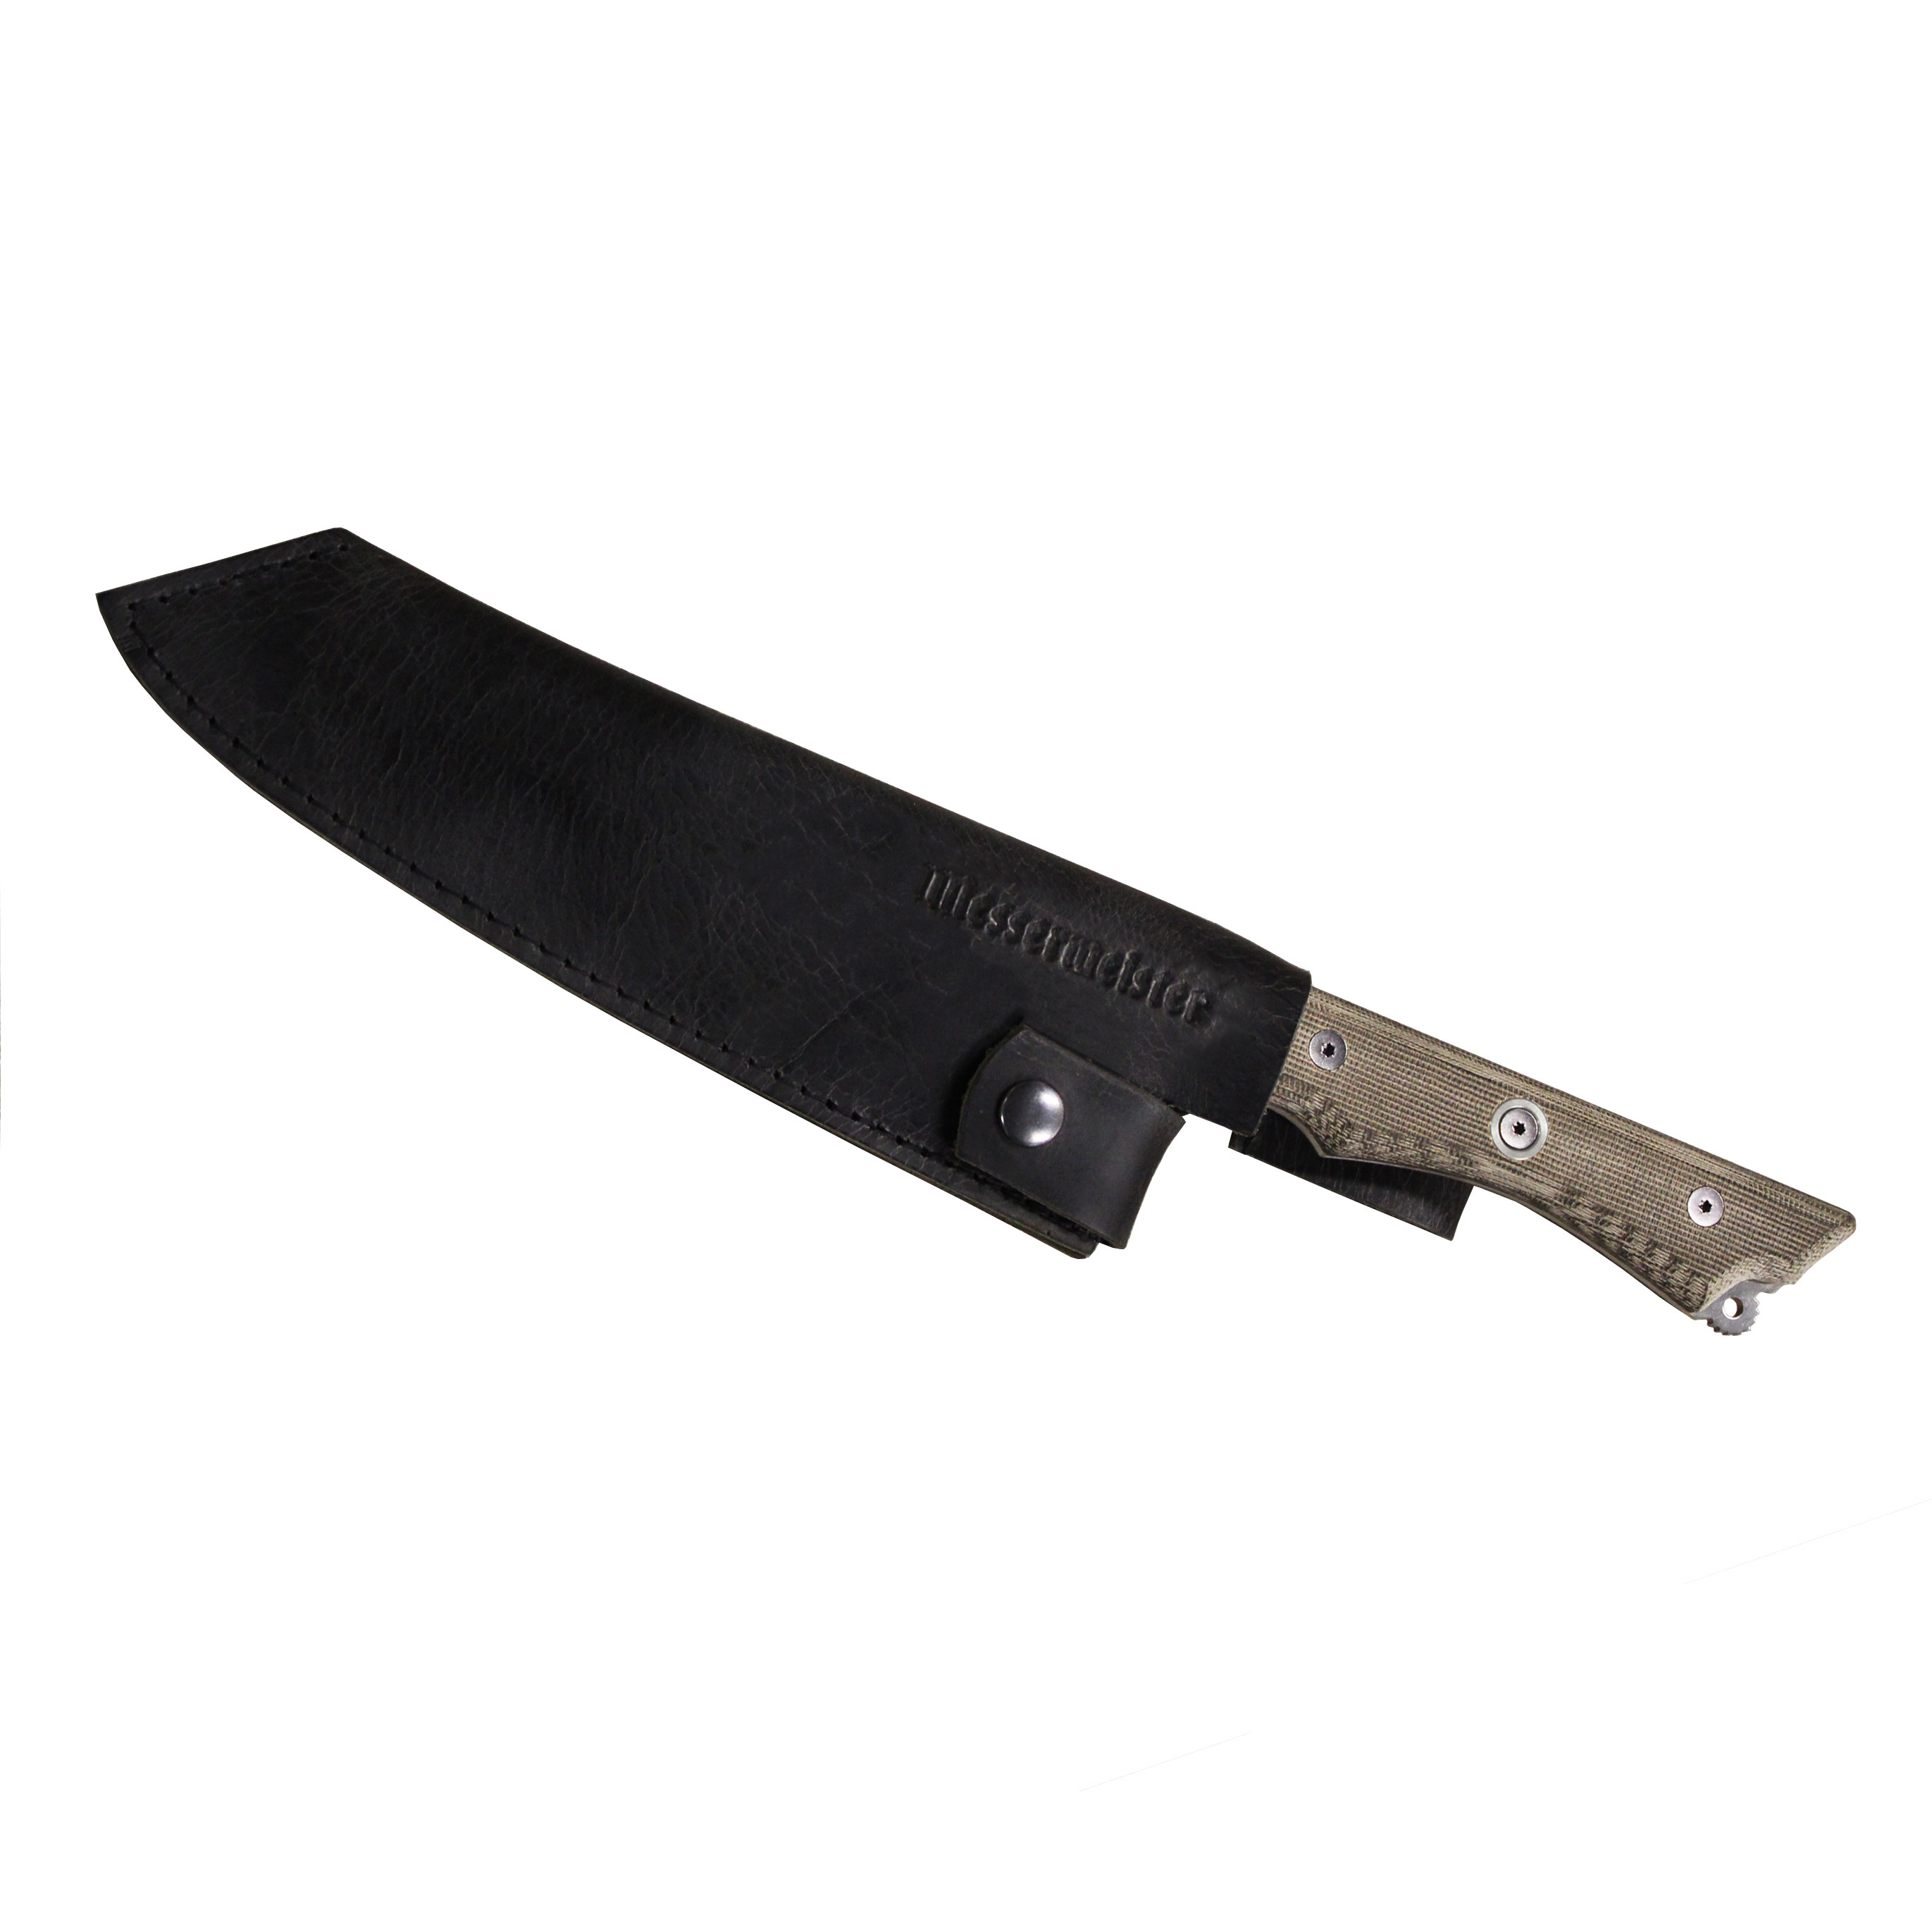 ALPS Series 8-Inch Chef's Knife with Sheath, Forged German Steel, Black,  502735